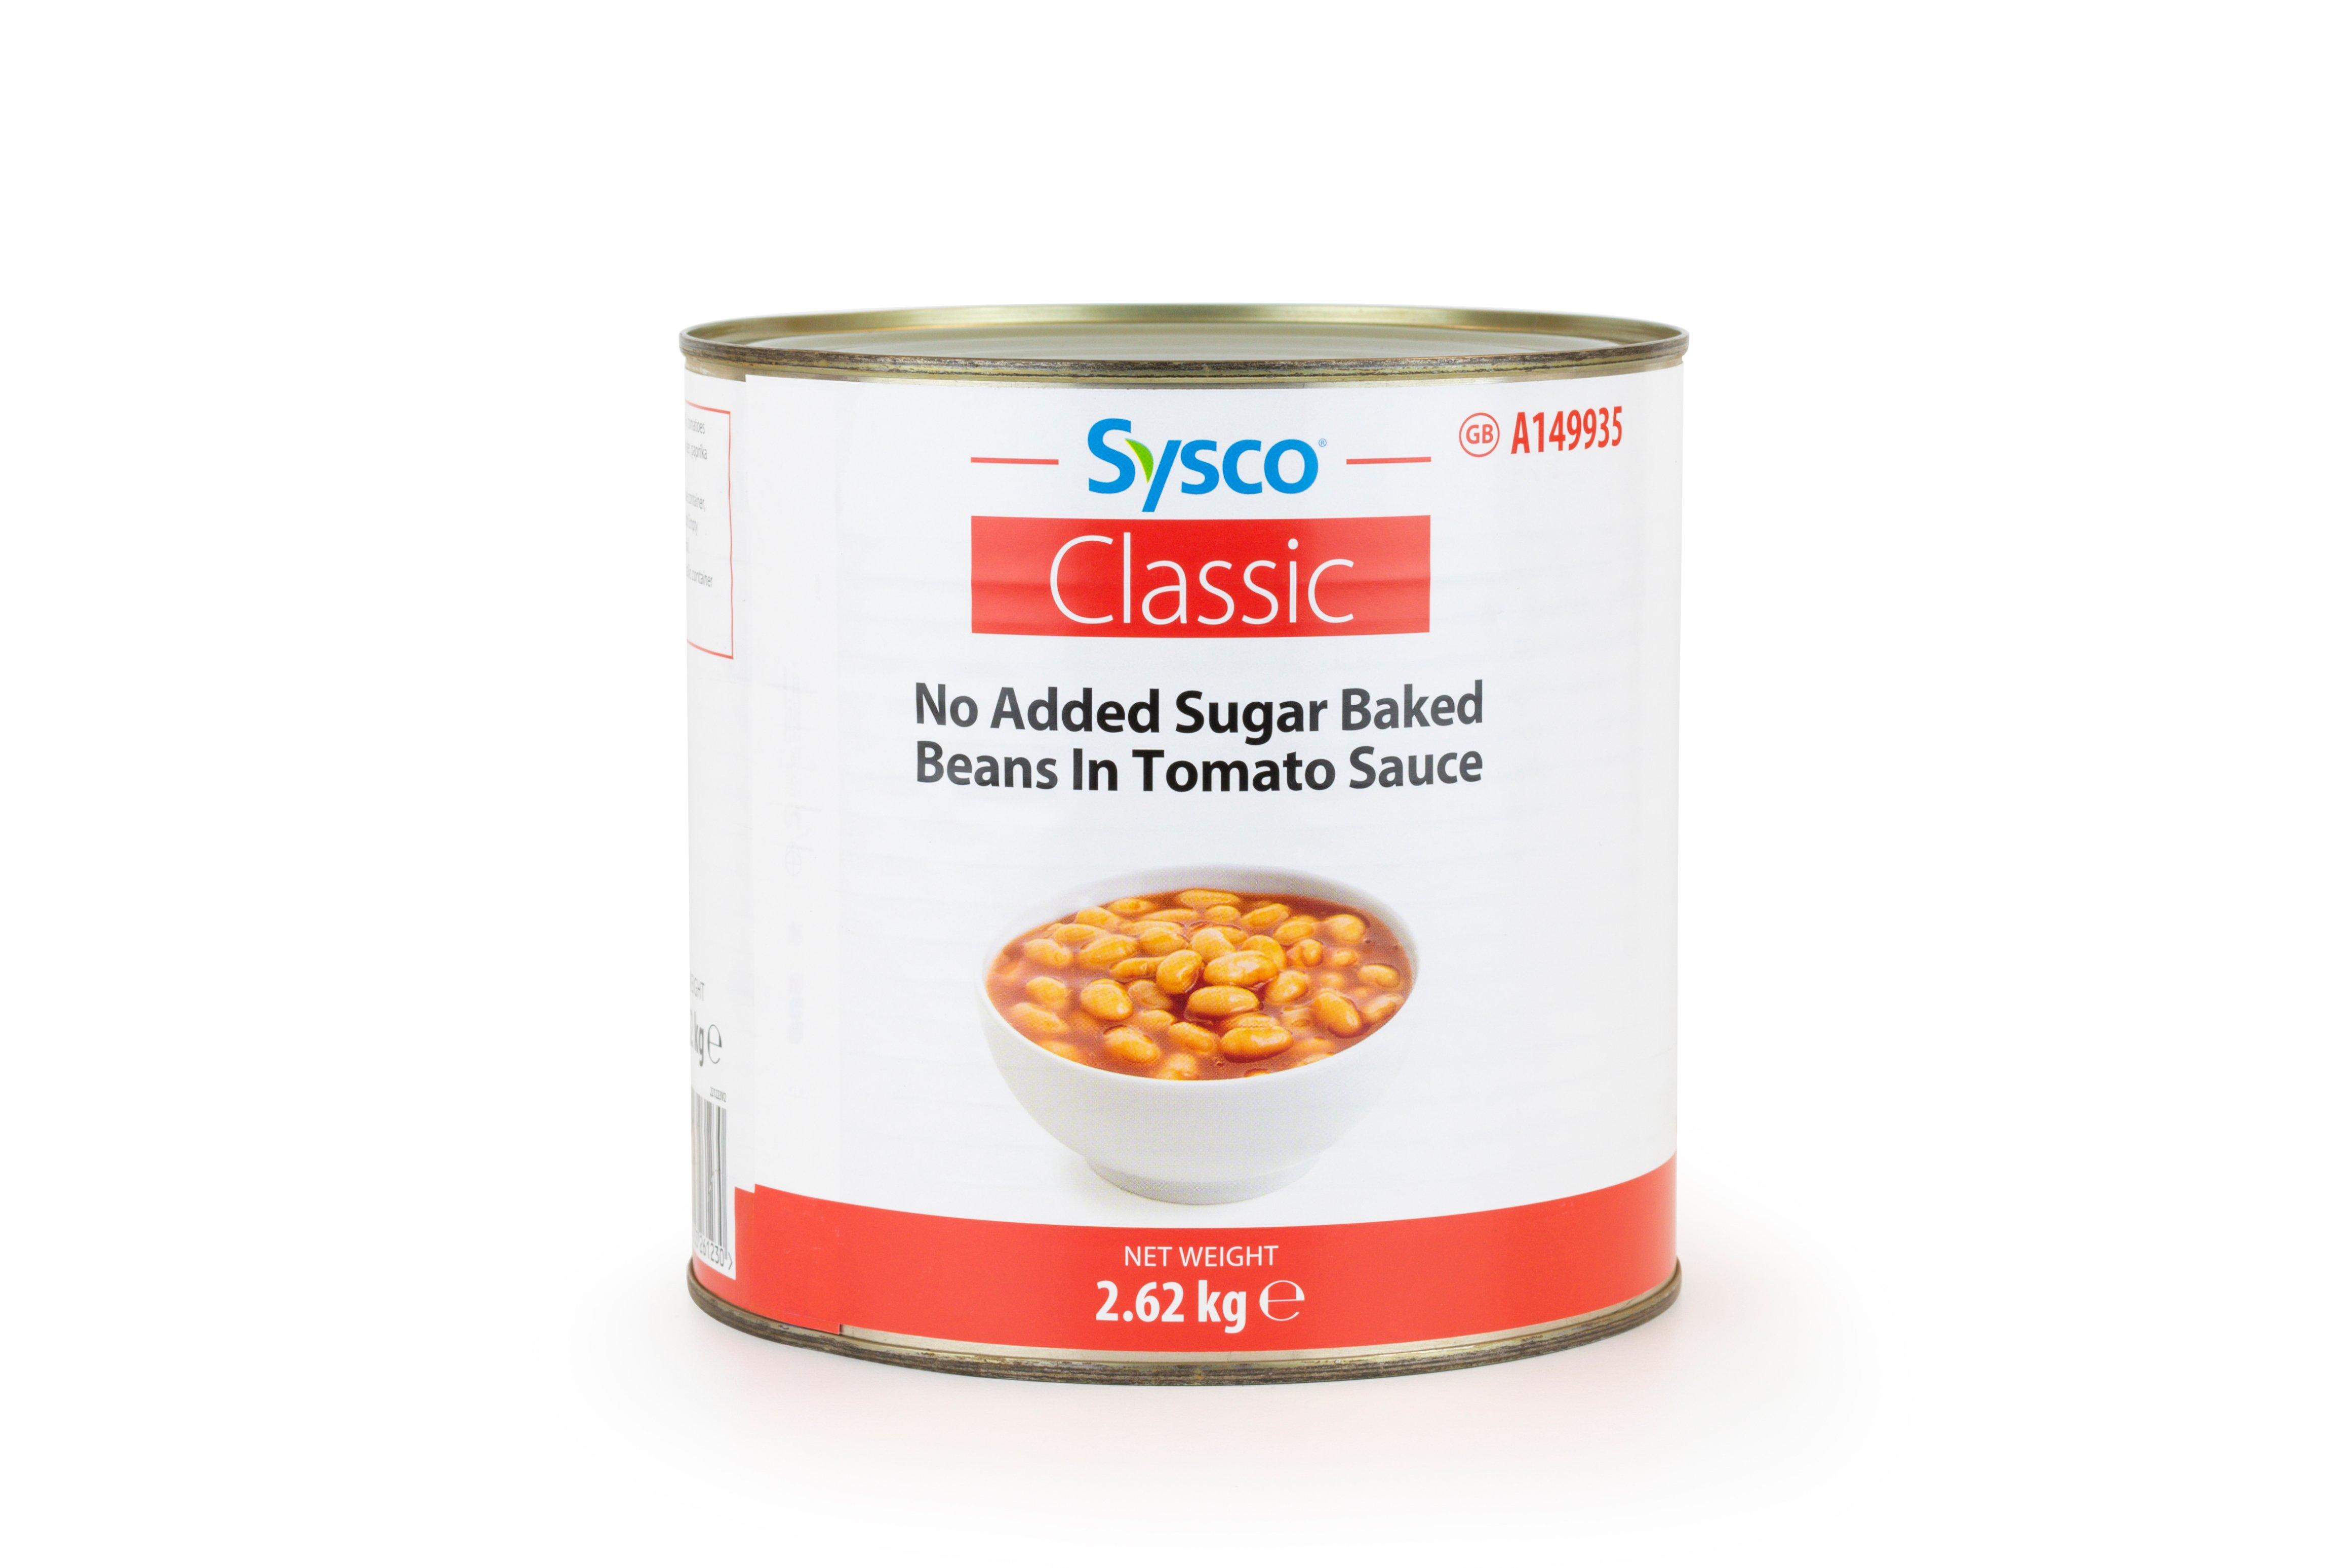 Sysco Classic No Added Sugar Baked Beans in Tomato Sauce